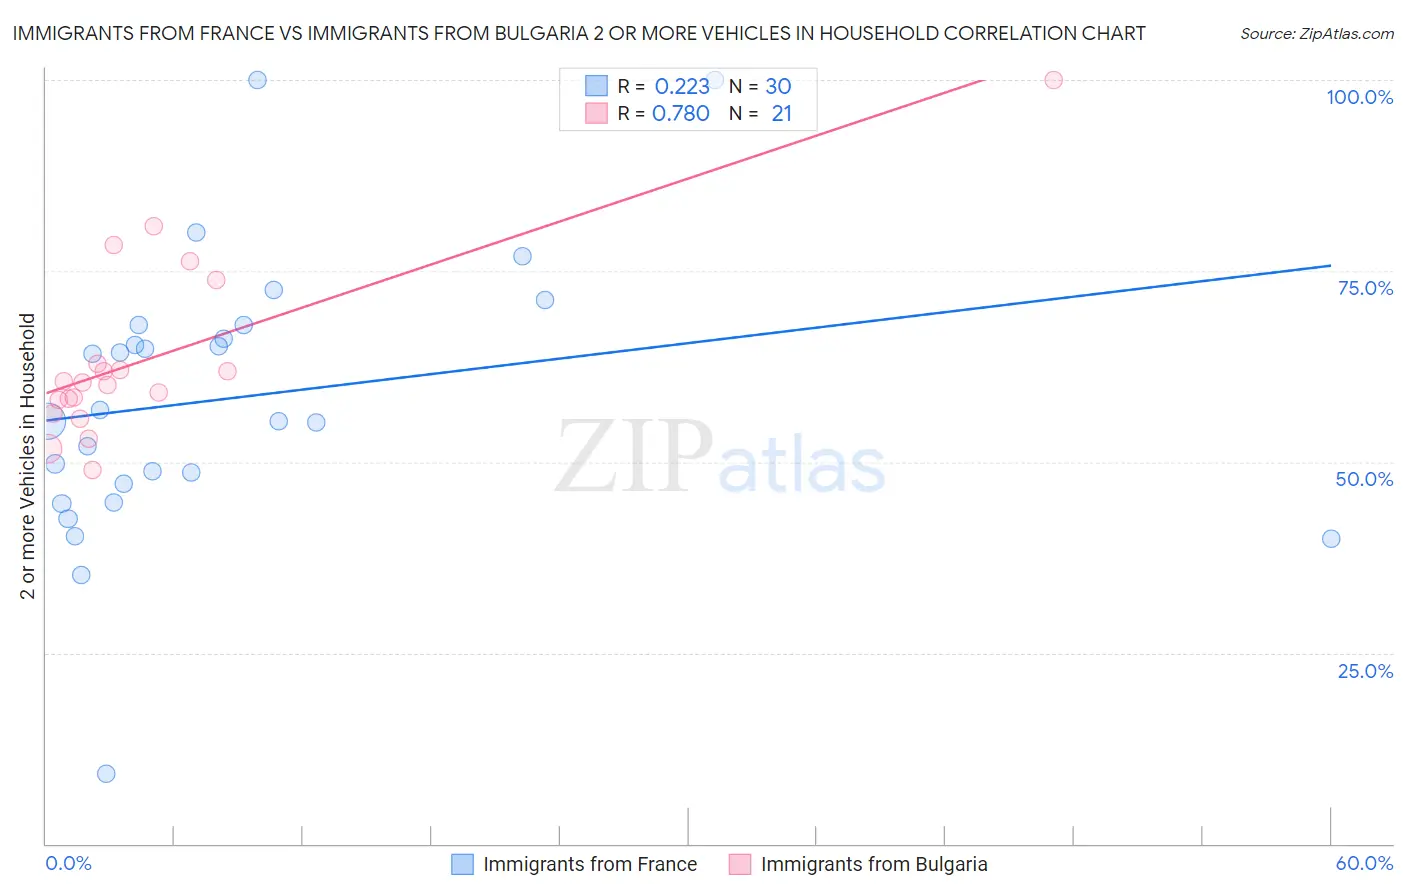 Immigrants from France vs Immigrants from Bulgaria 2 or more Vehicles in Household